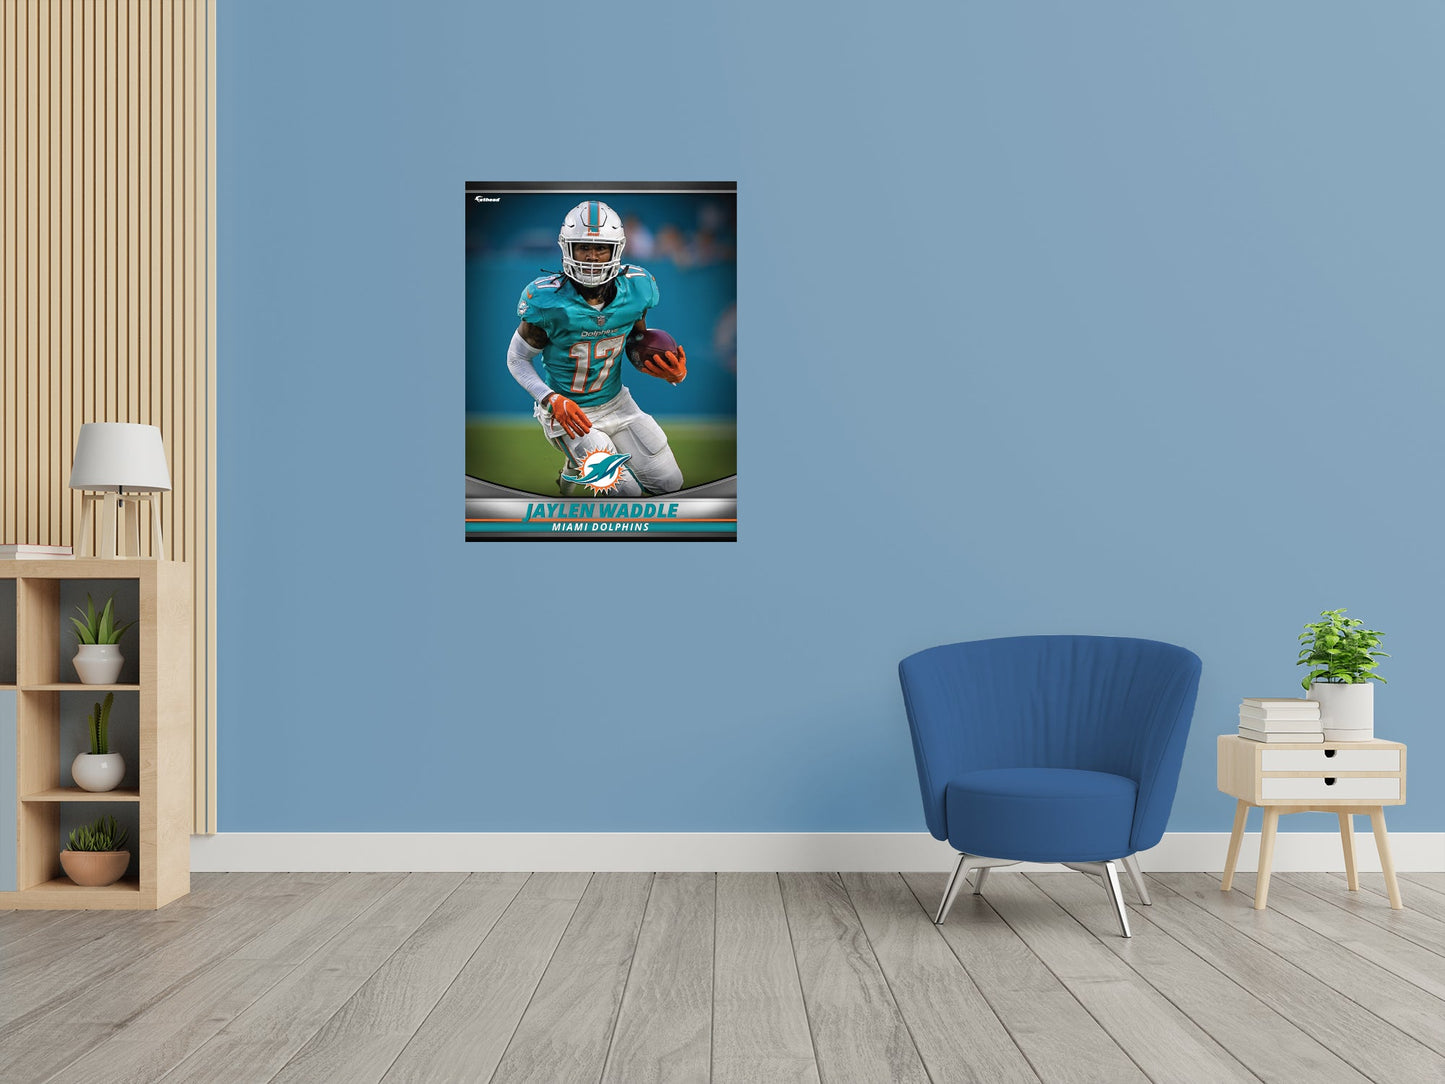 Miami Dolphins: Jaylen Waddle GameStar - Officially Licensed NFL Removable Adhesive Decal